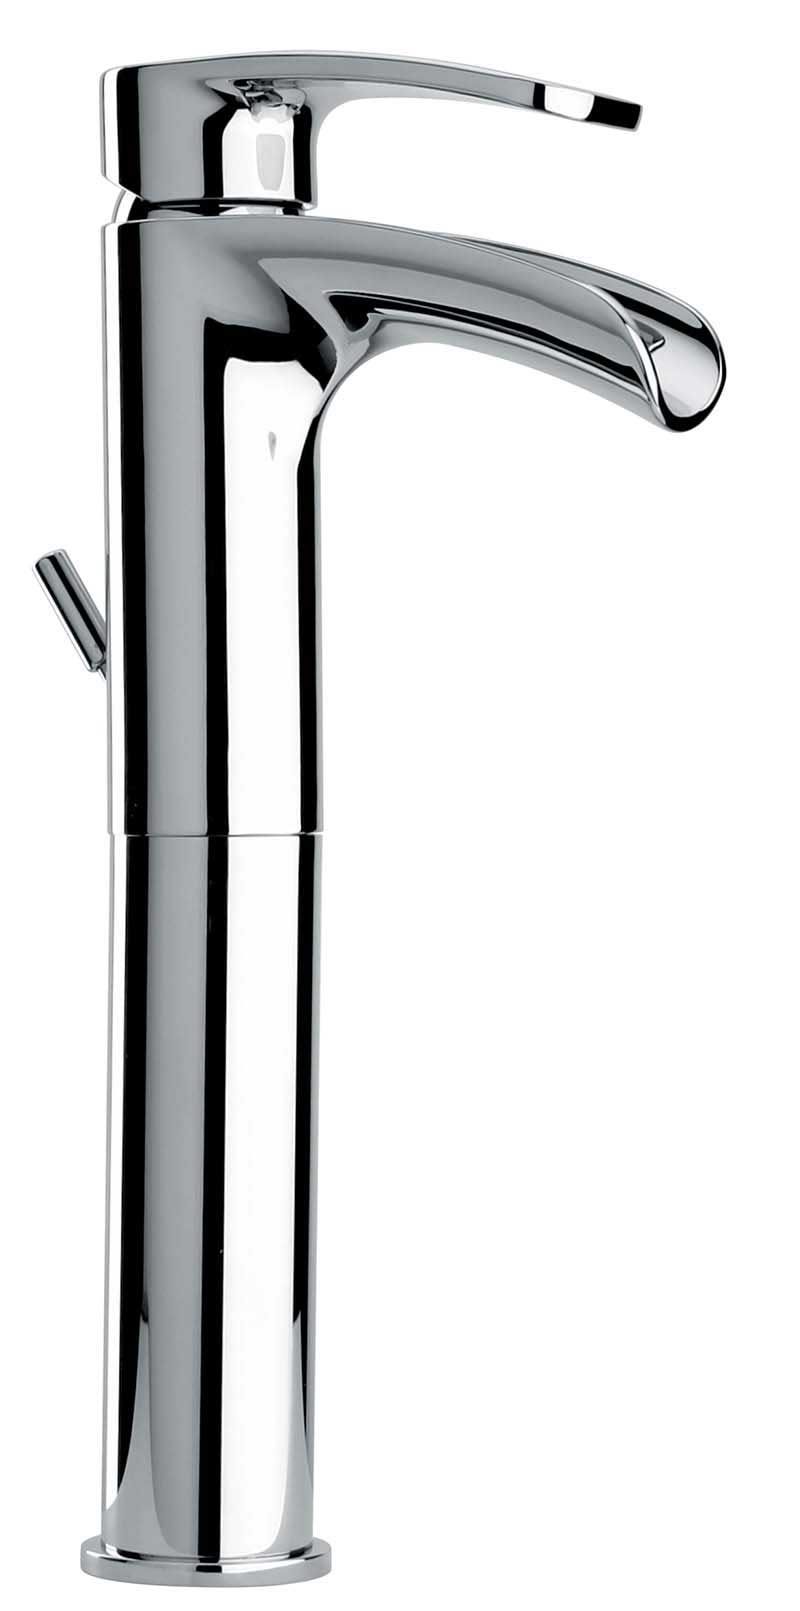 Jewel Faucets Single Loop Handle Tall Vessel Sink Faucet With Waterfall Spout with Designer Finish 10205WFS-X